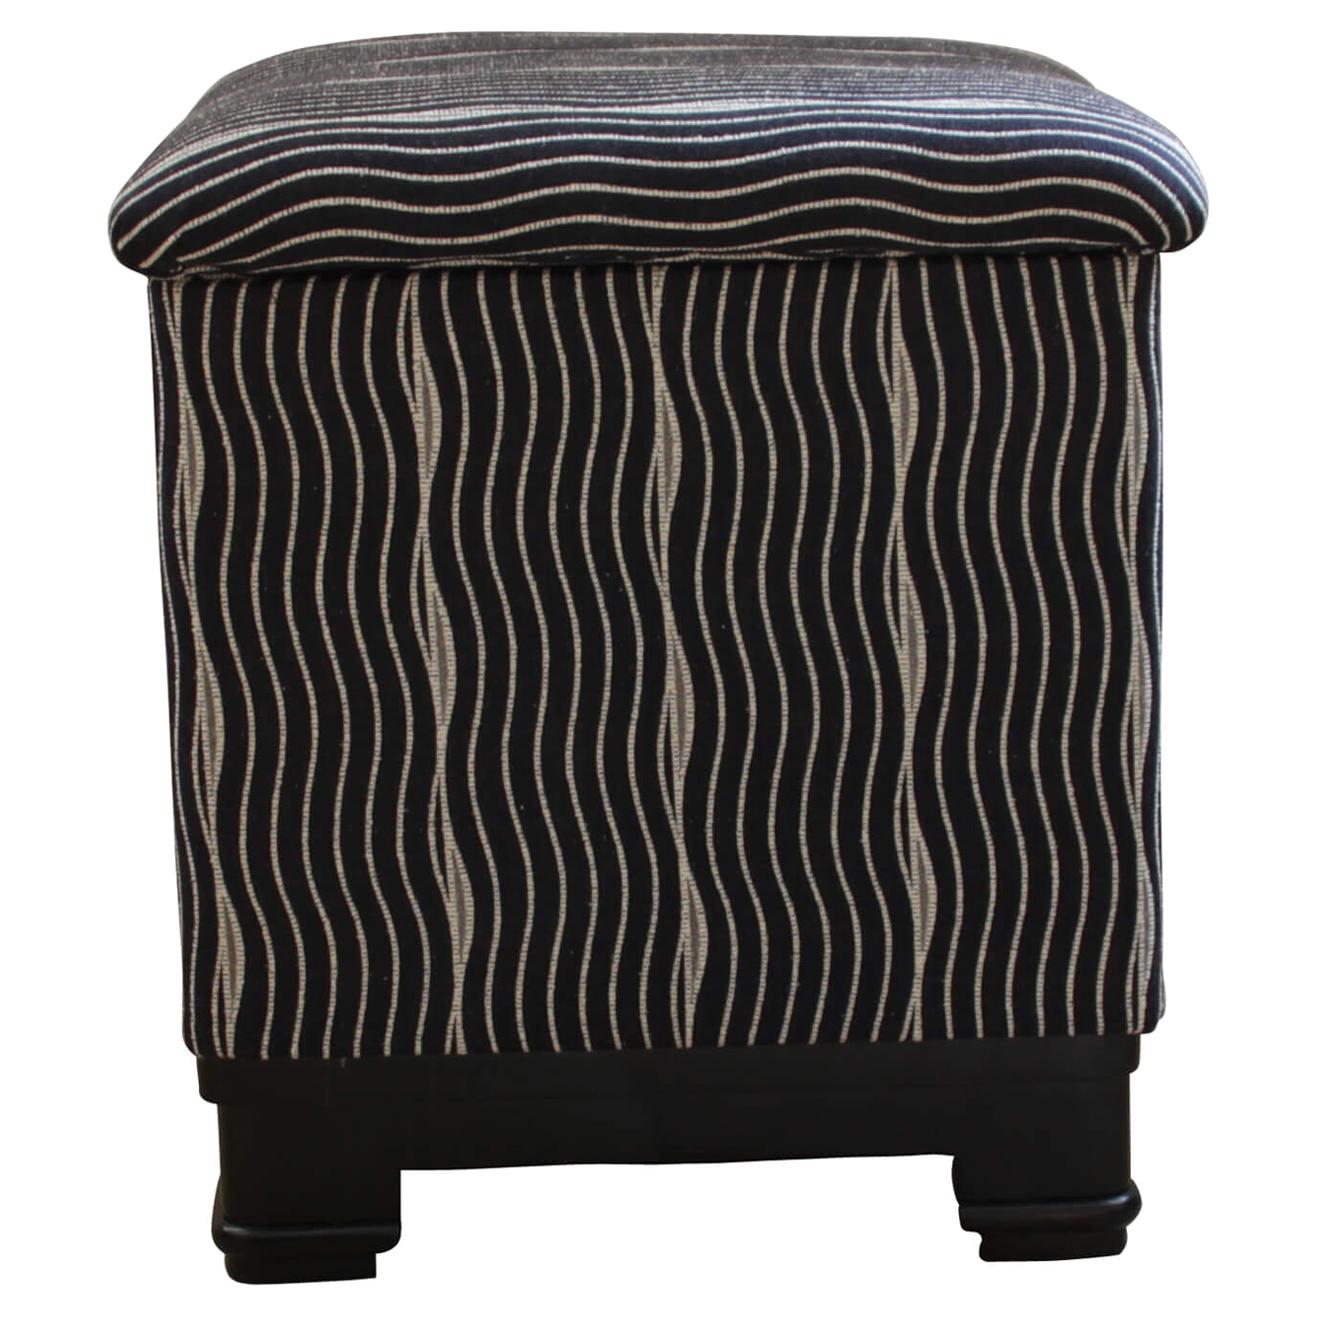 Art Deco Stool / Pouff with Fold-Up Seat, France, circa 1930 For Sale